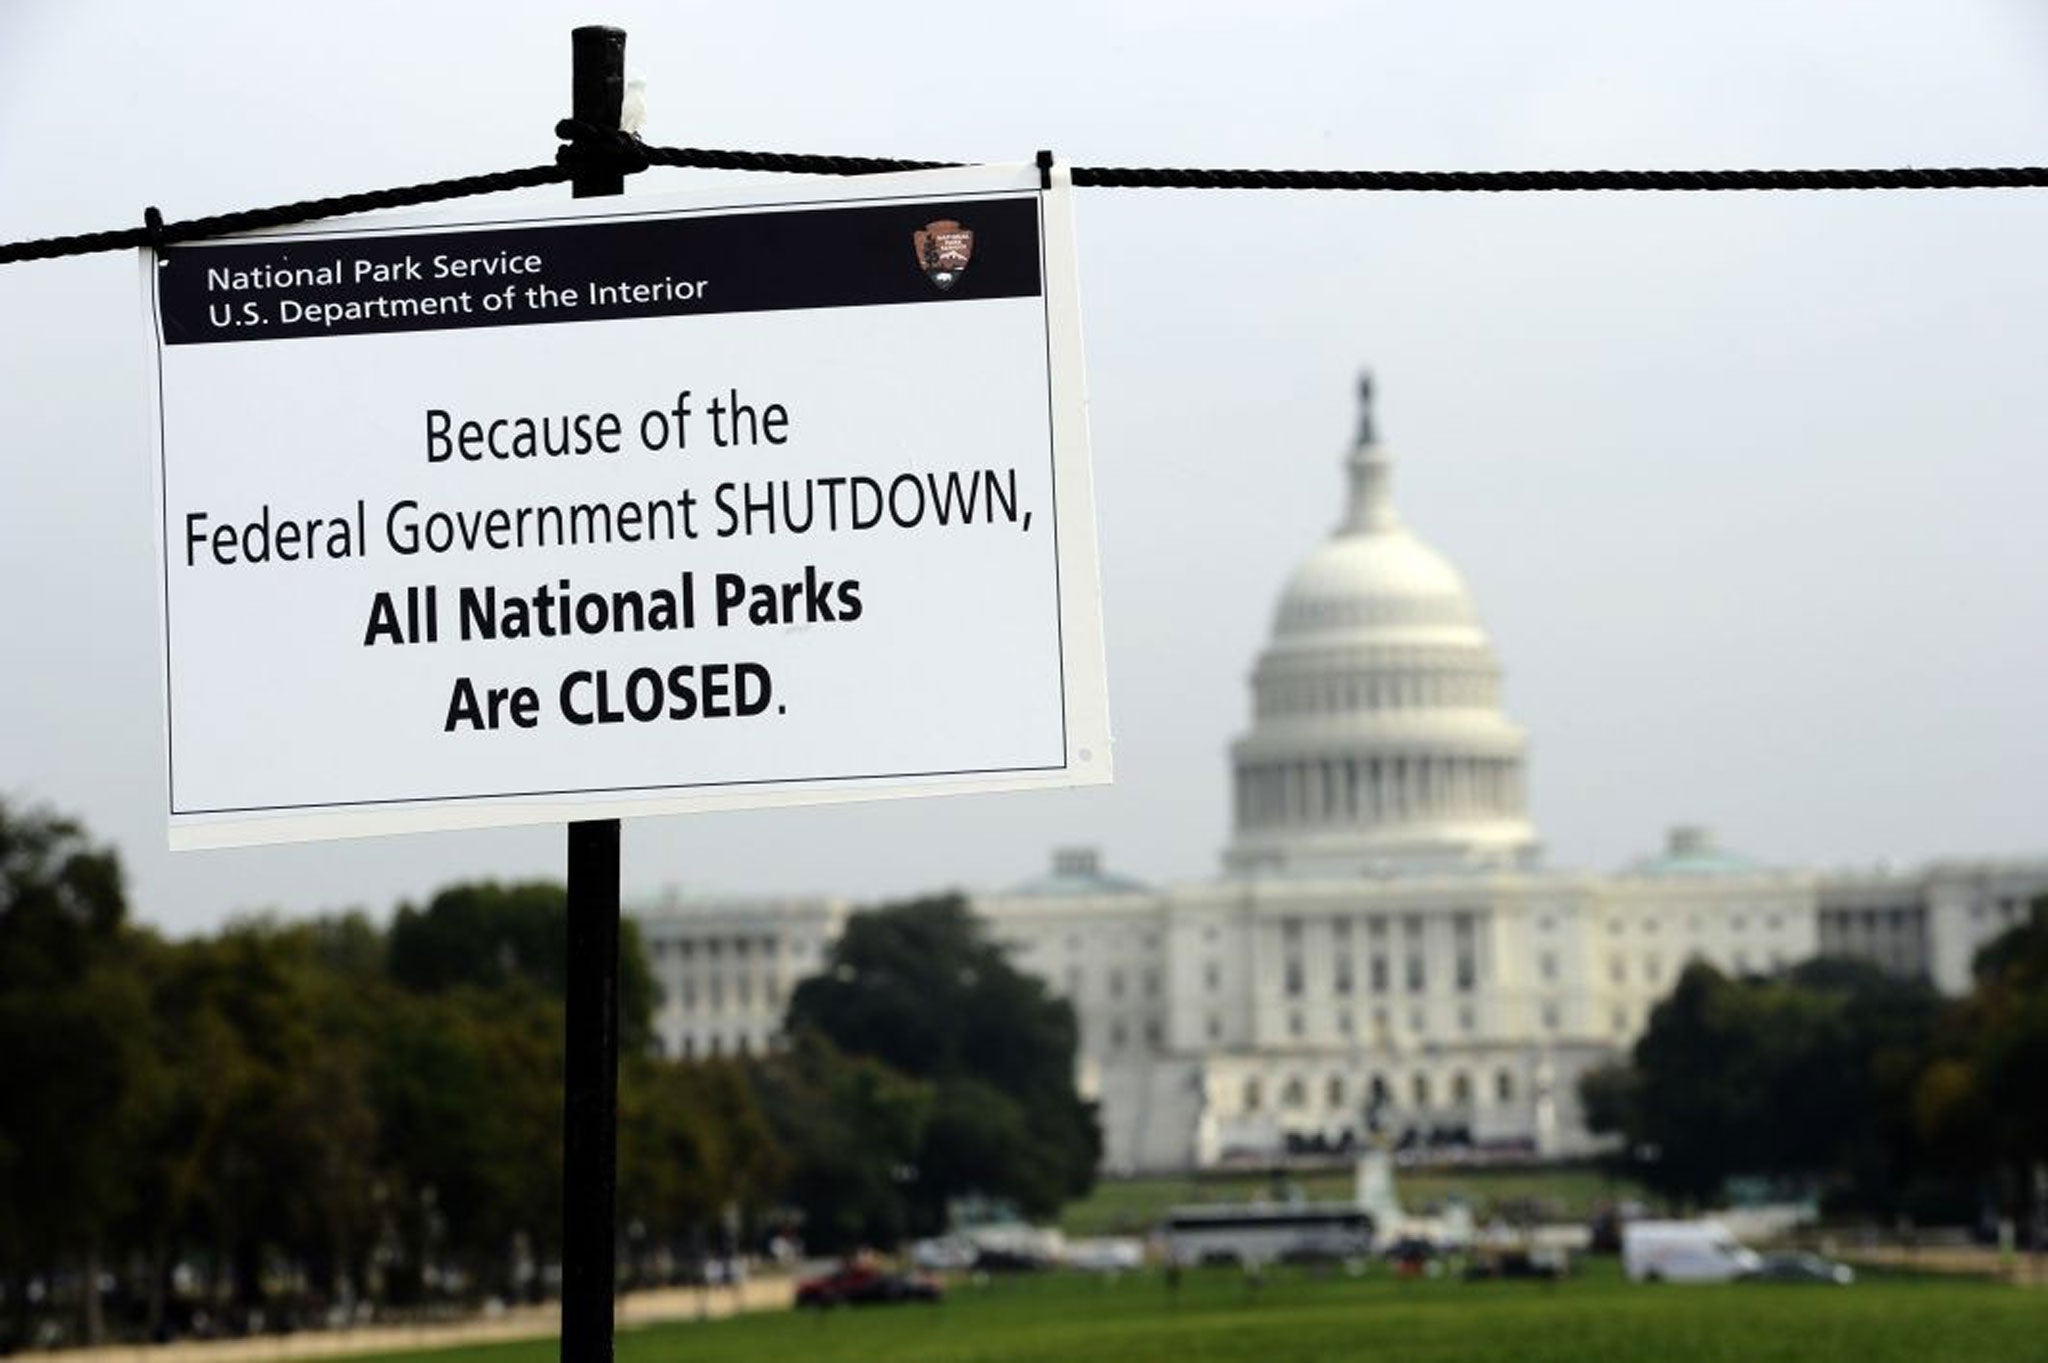 Far from being cause for concern, experts say the US government shutdown offers investment opportunities